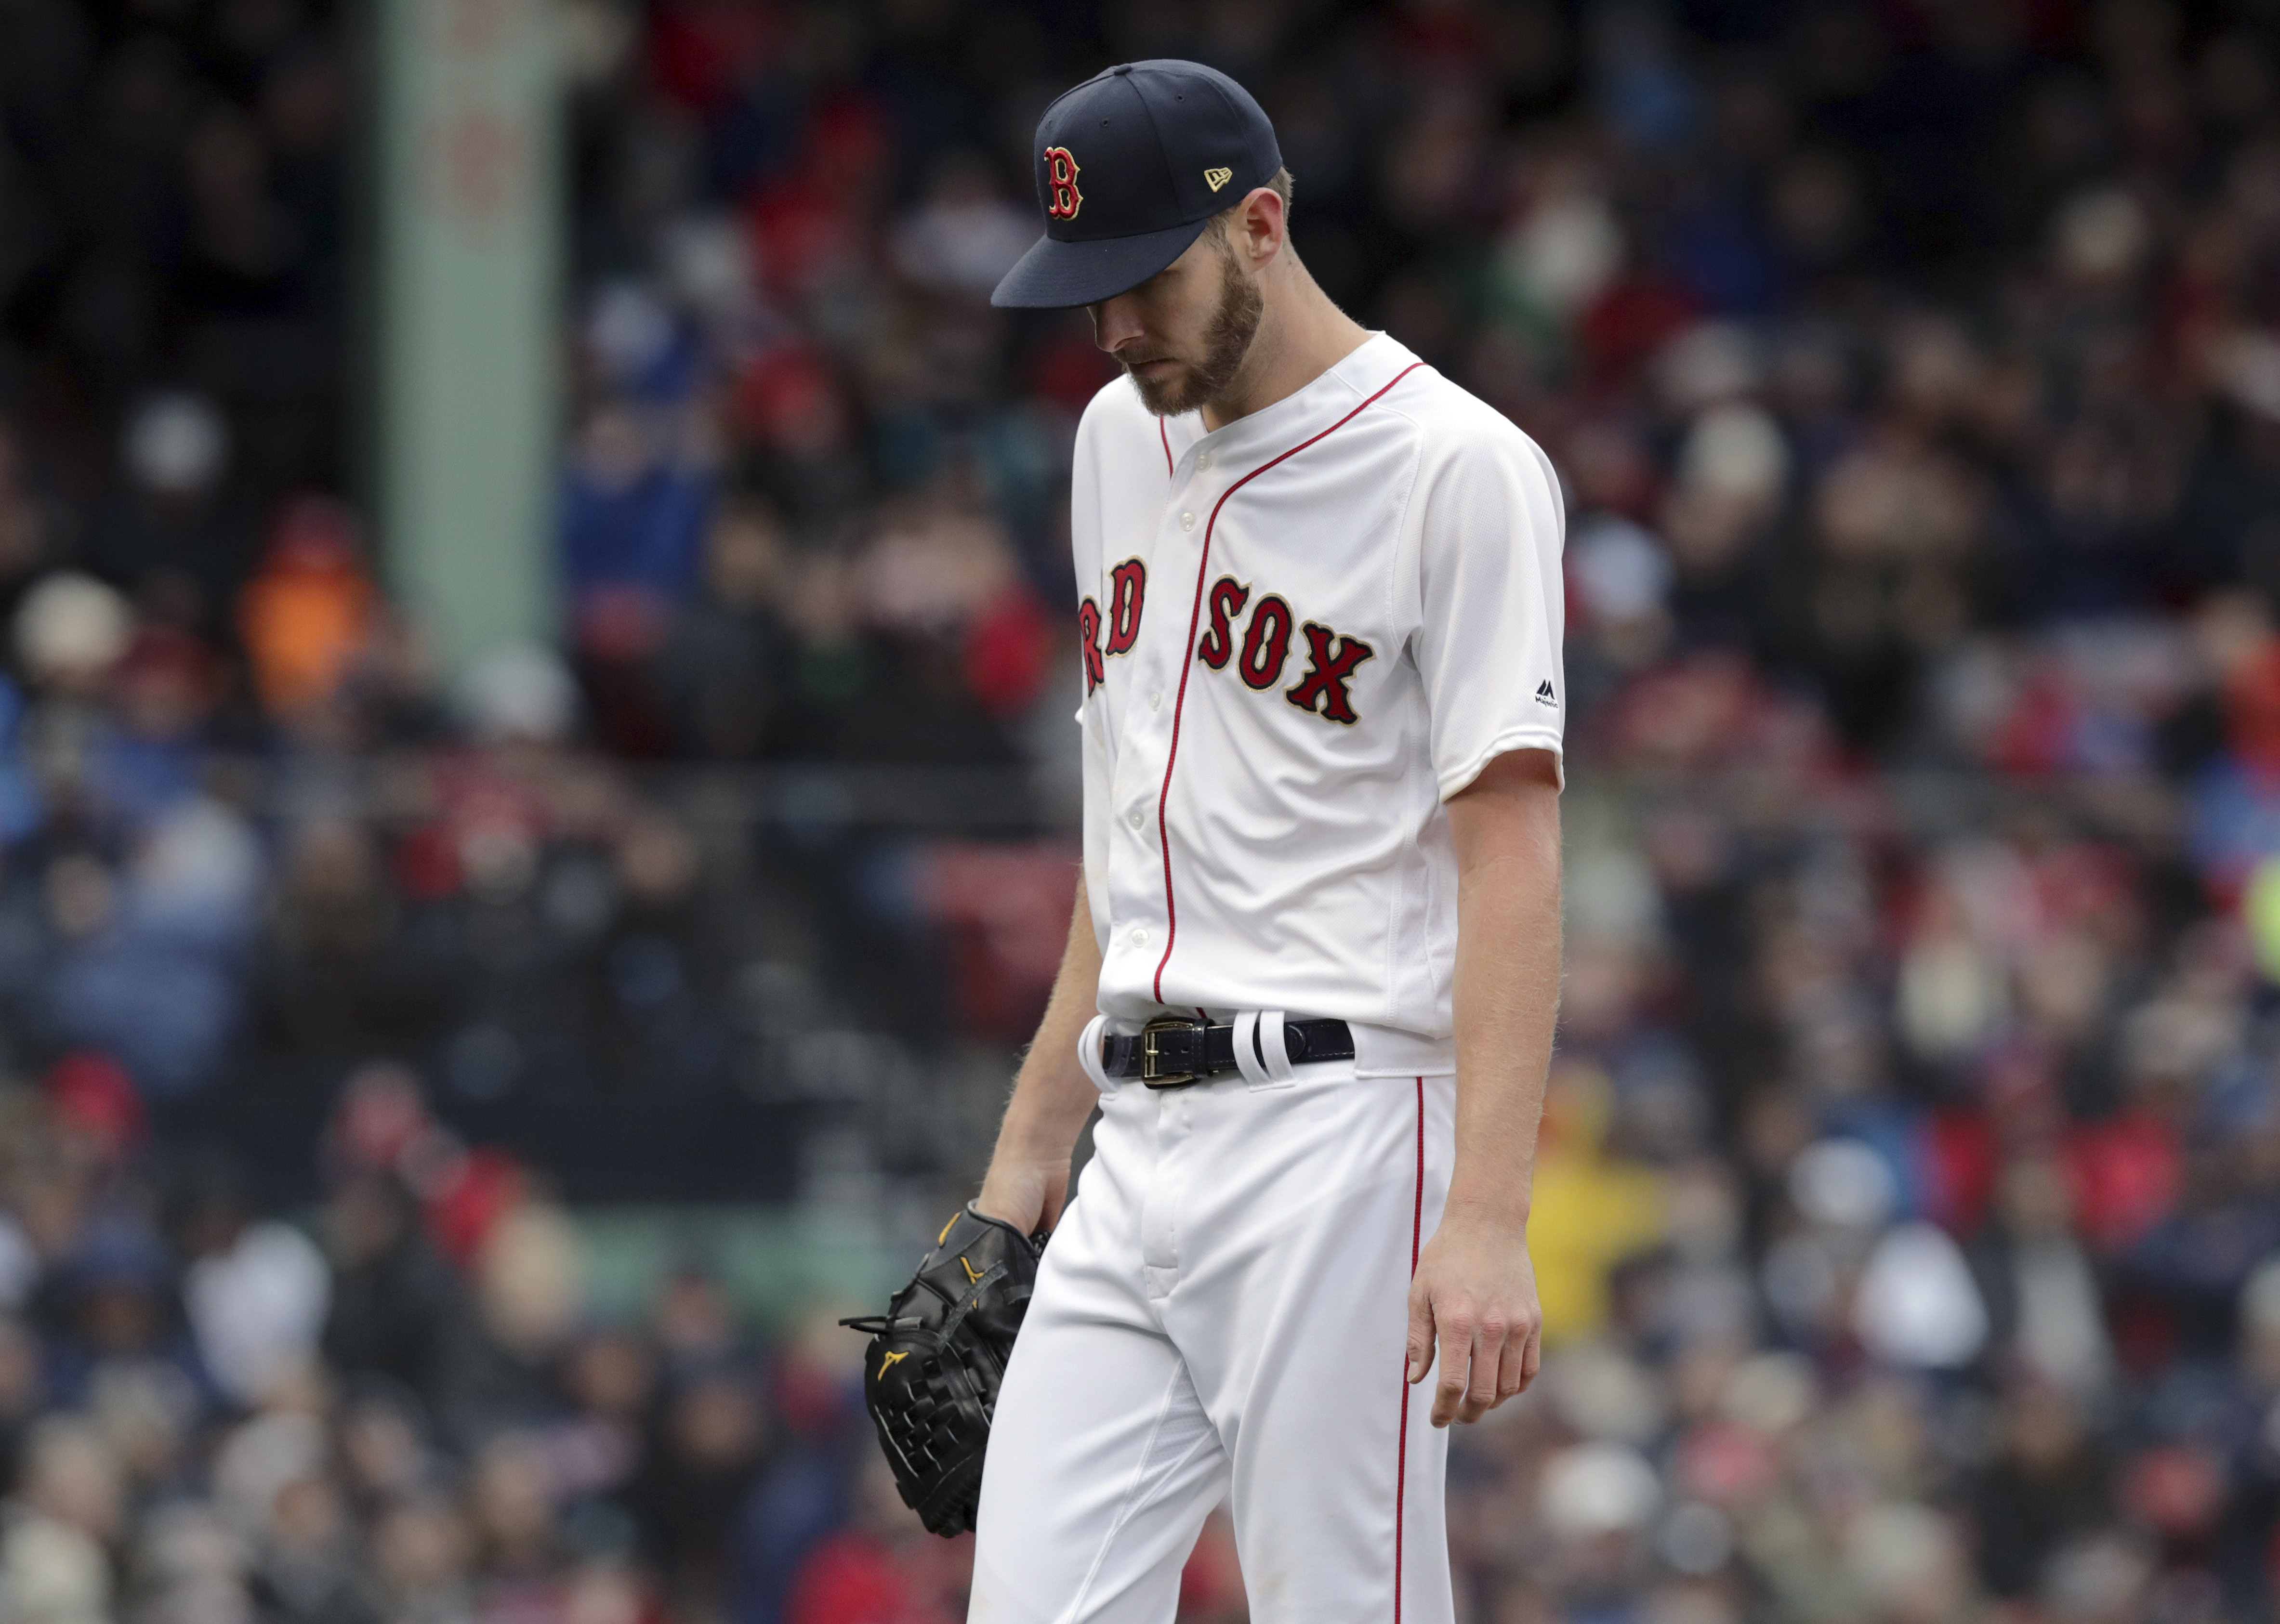 Sale struggles as Red Sox drop home opener against Blue Jays